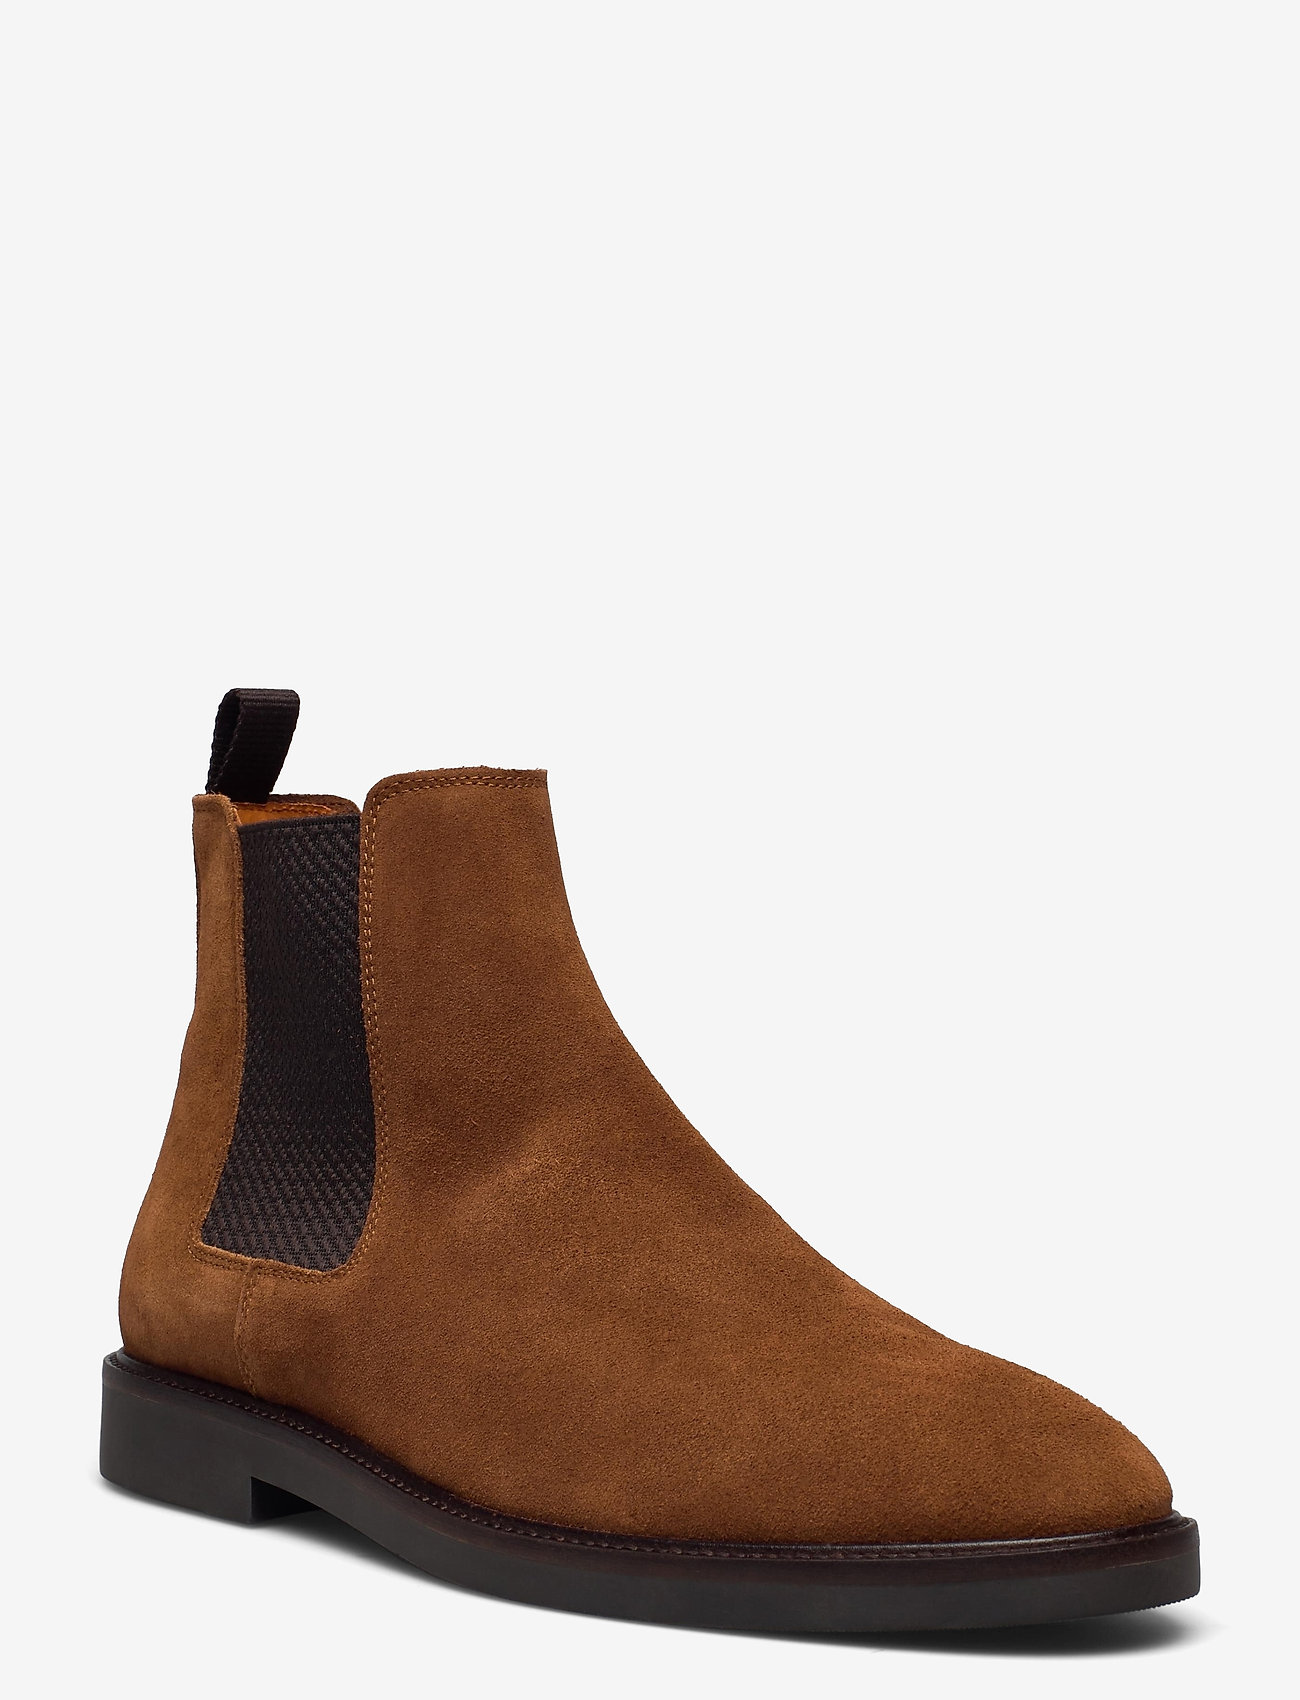 Leather Chelsea - Chelsea boots | Boozt.com